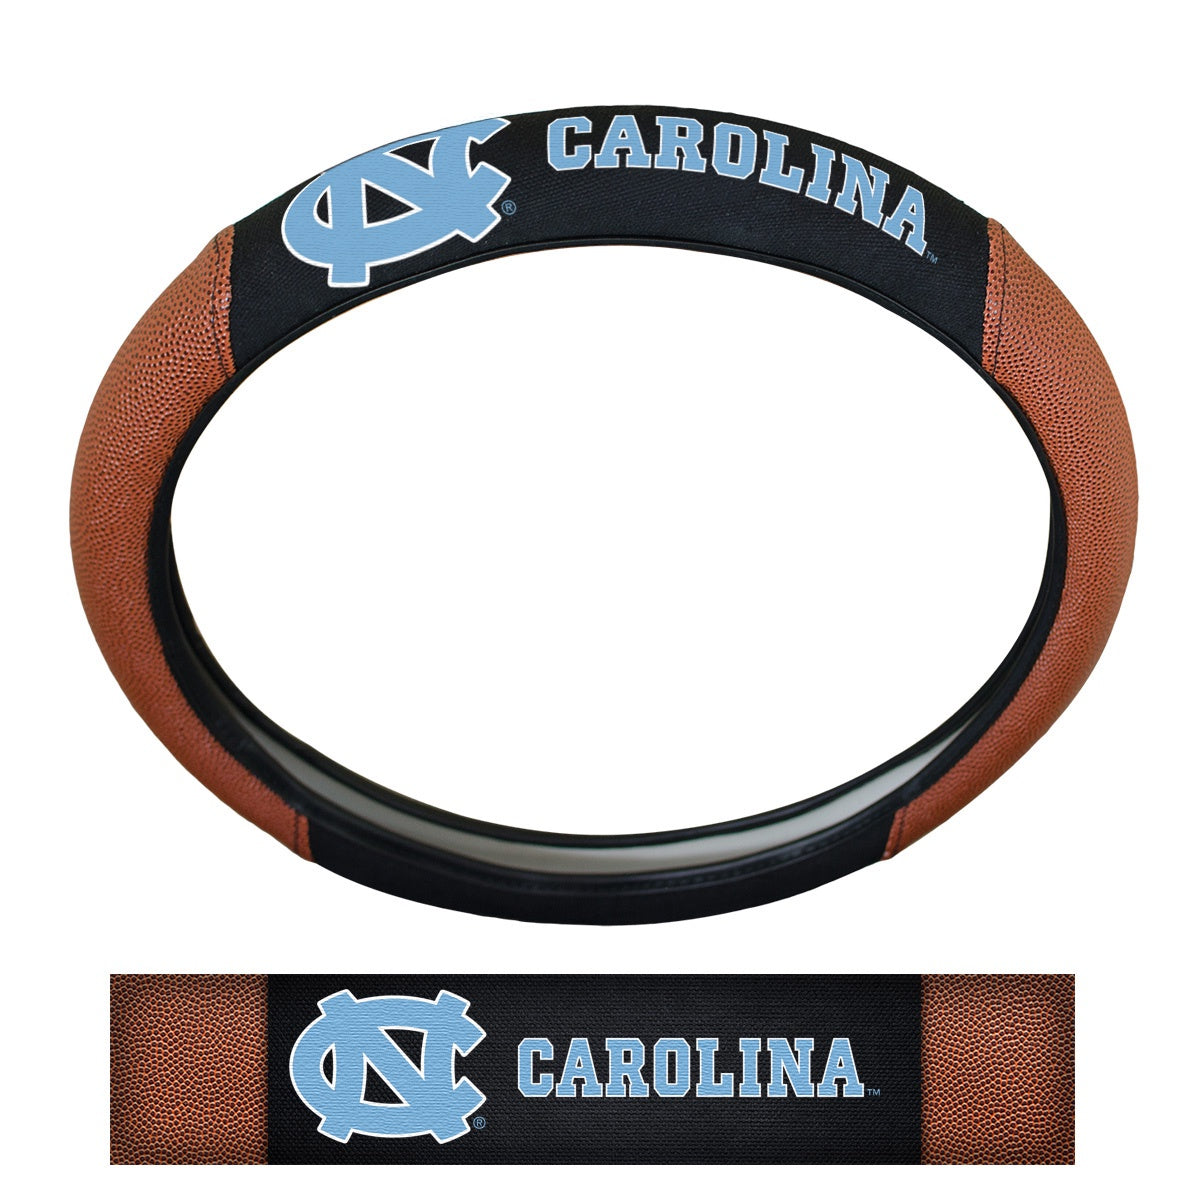 North Carolina Tar Heels Sports Grip Steering Wheel Cover with Primary Logo and Wordmark by Fanmats